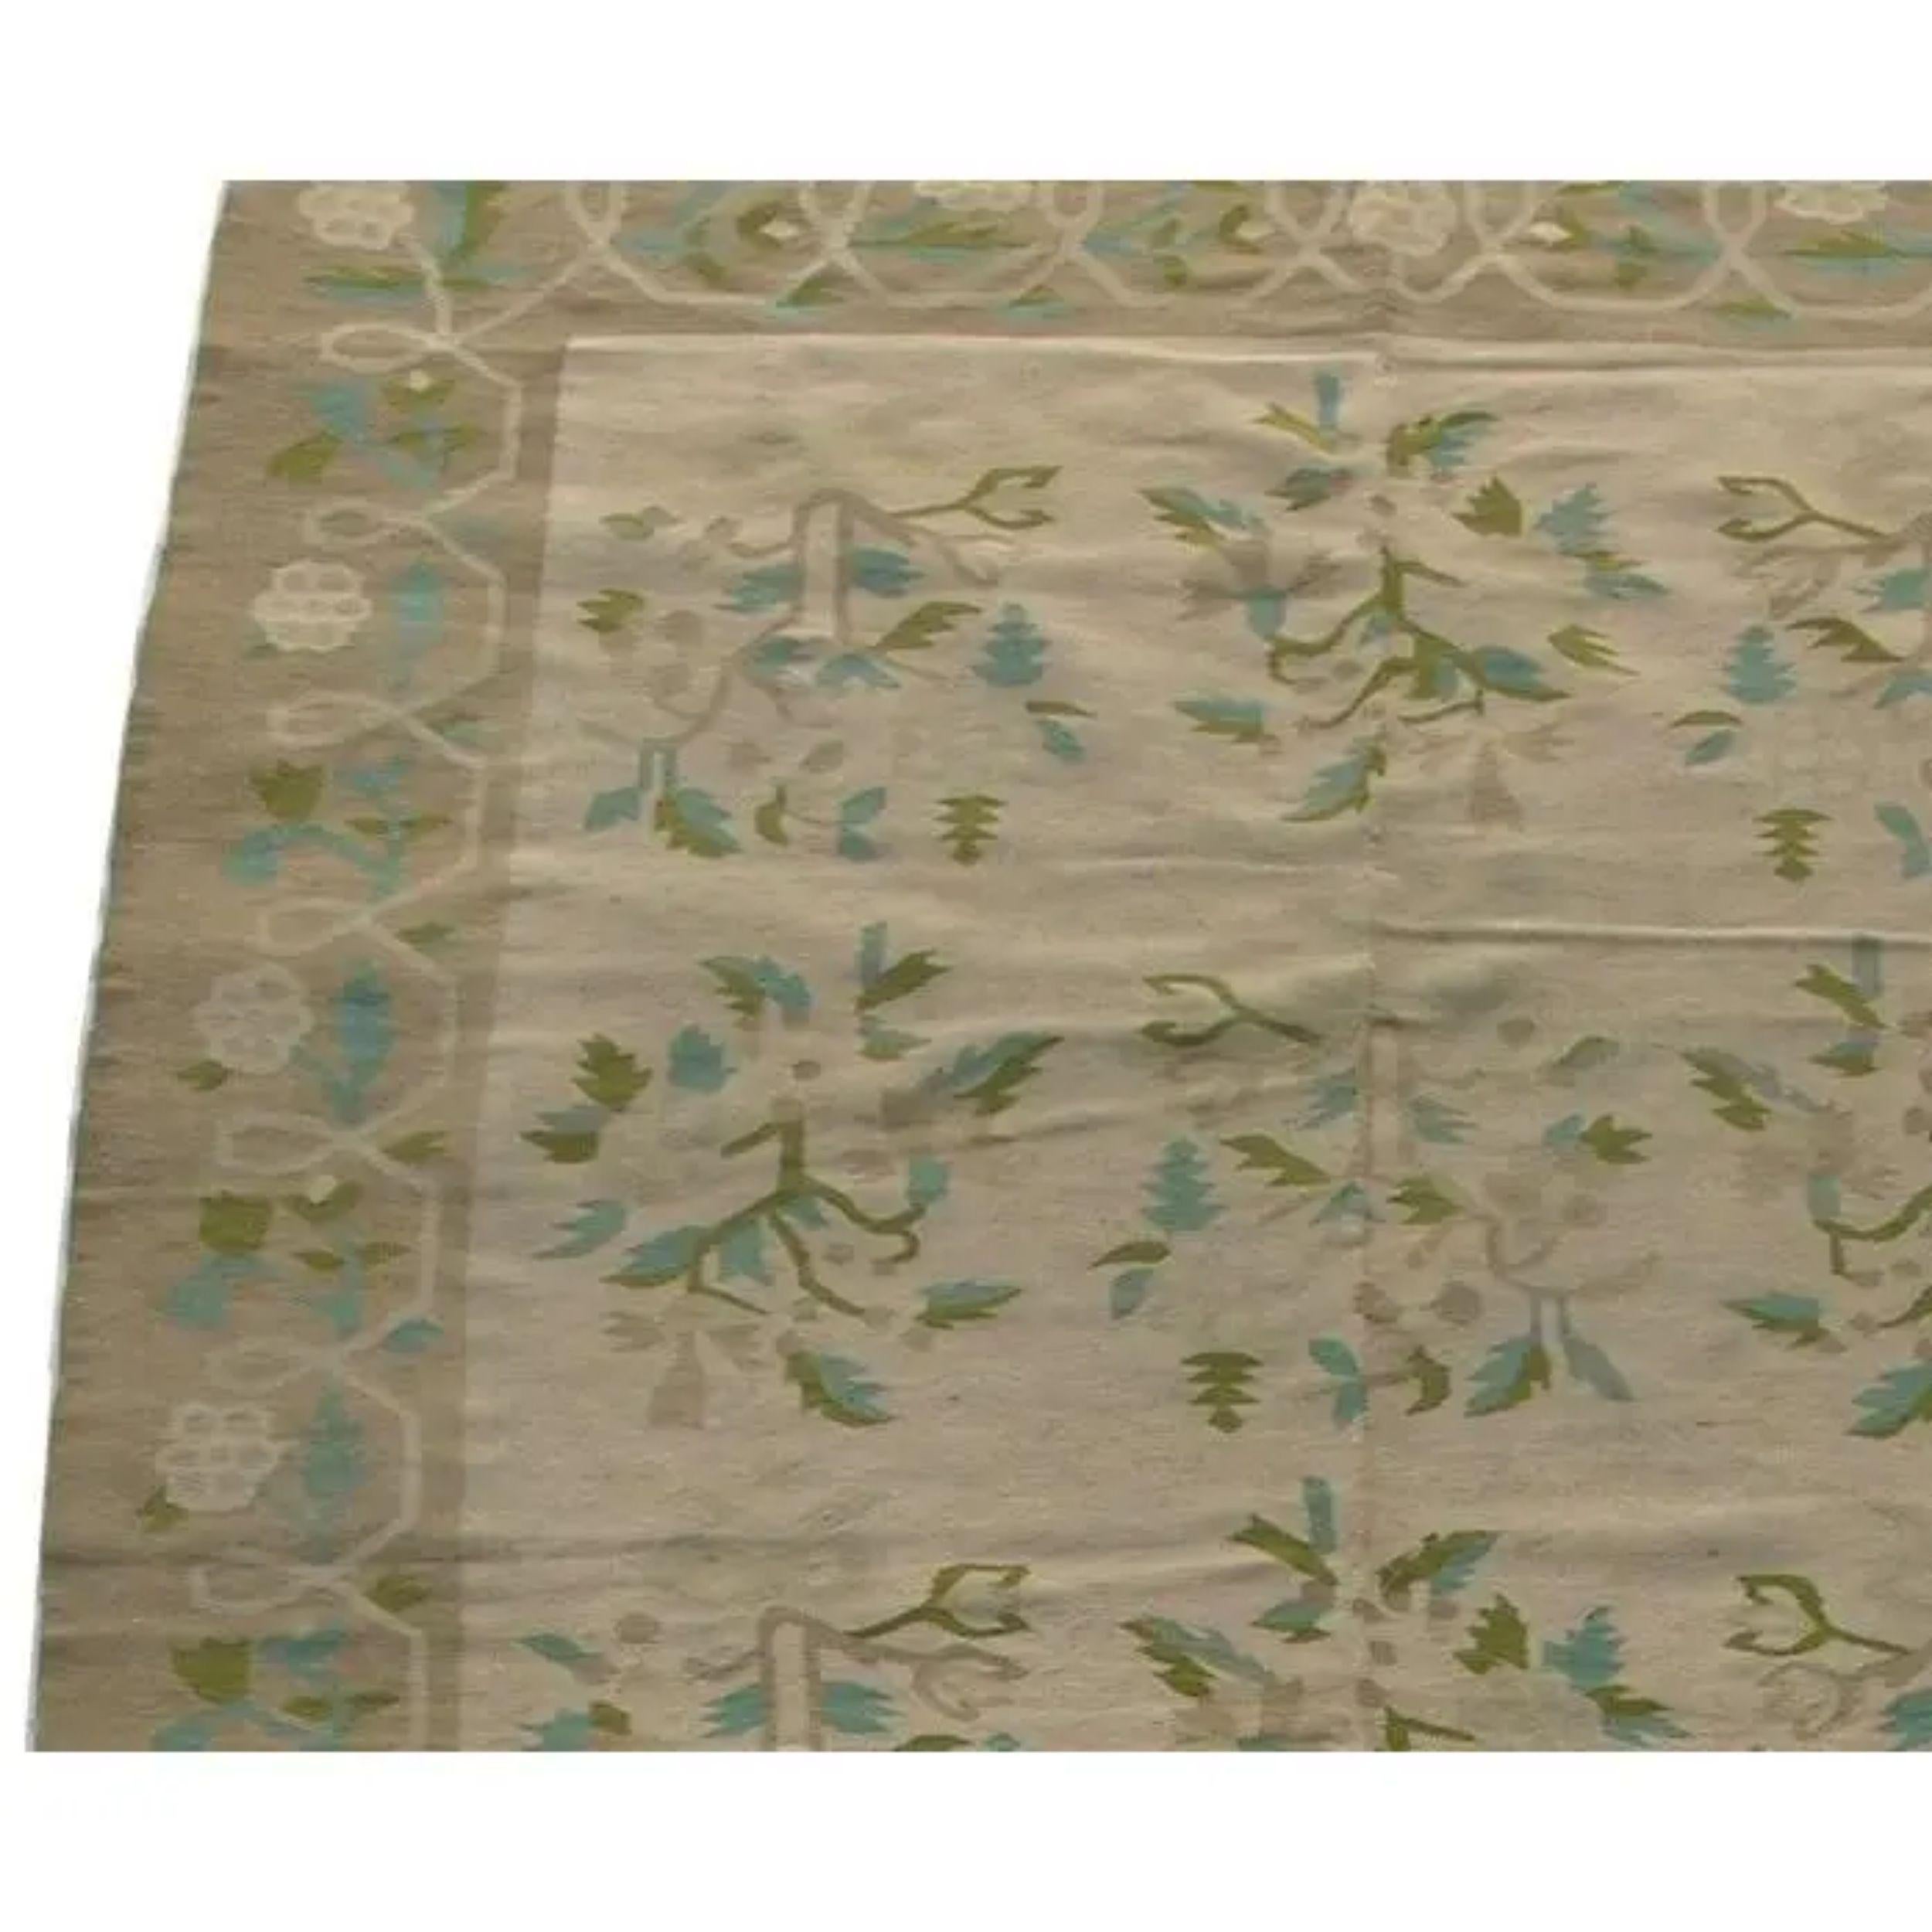 Early 20th Century Antique Bessarabian Floral Design Rug 10'2'' X 6'2'' For Sale